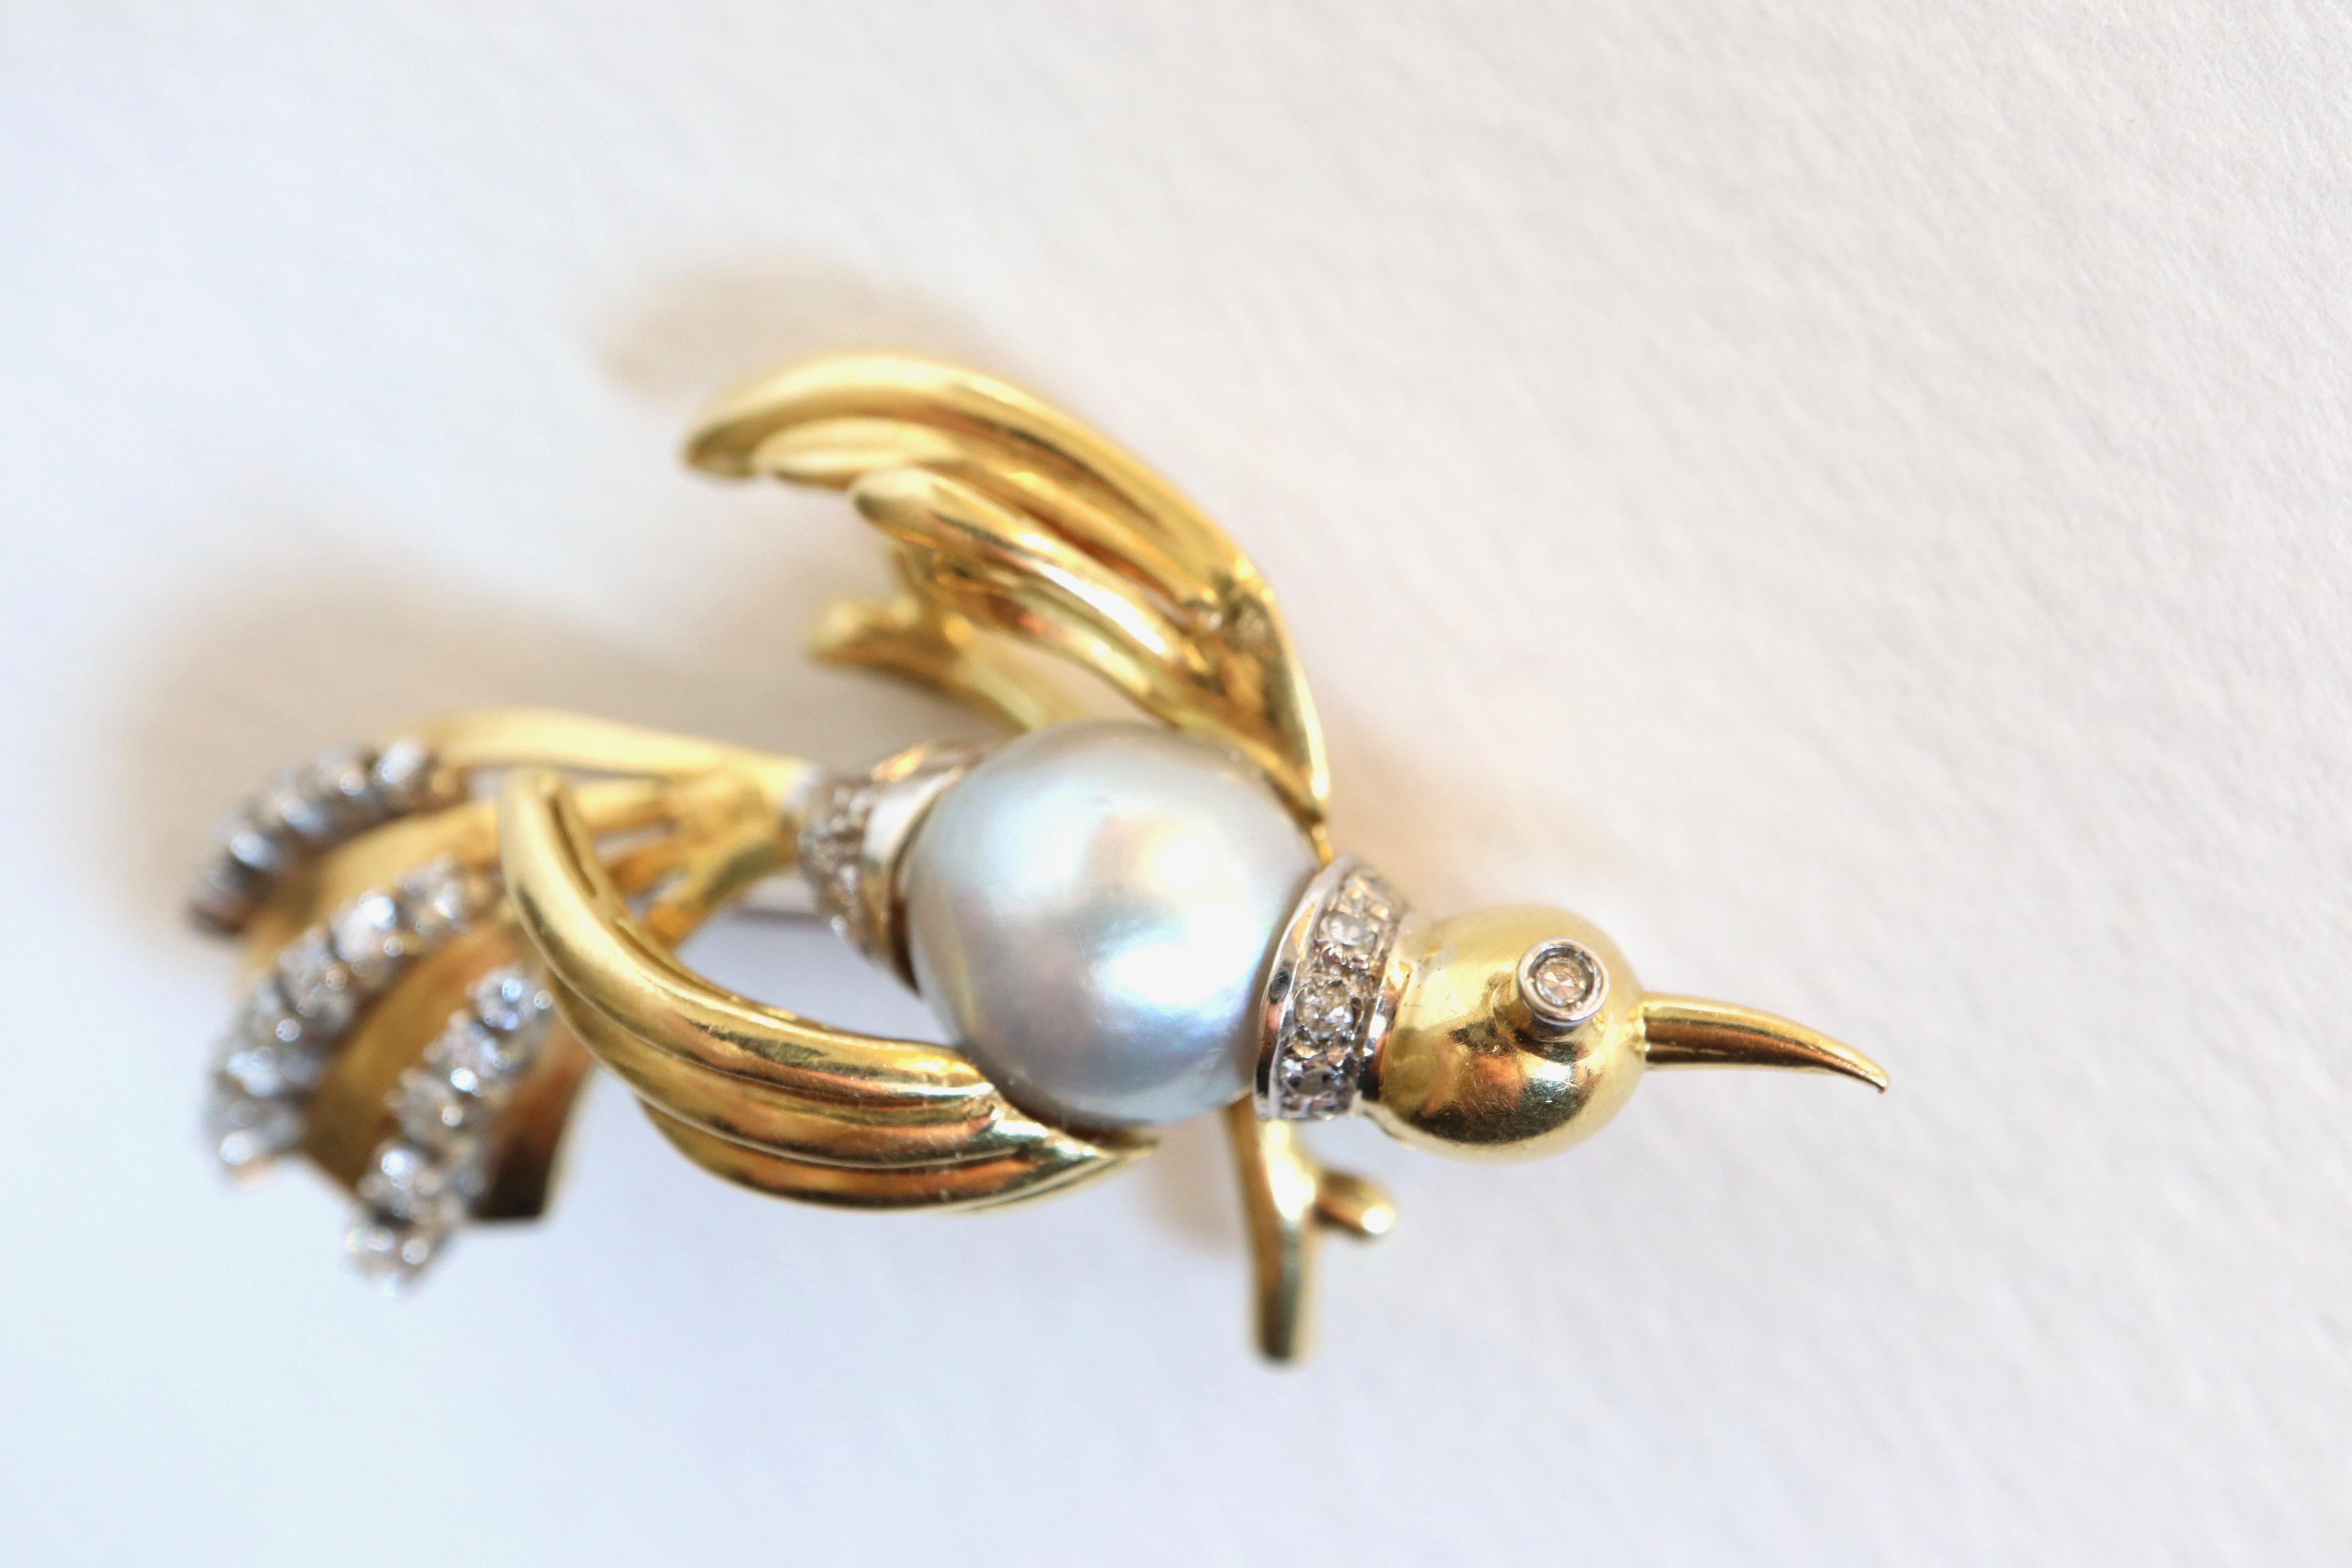 Antique Bird brooch circa 1960 in 18 Kt yellow gold and 18 carats white gold, set in its center with a gray pearl forming the body of the bird surrounded by diamonds. The tail of the bird is formed of stylized feathers in yellow gold interspersed